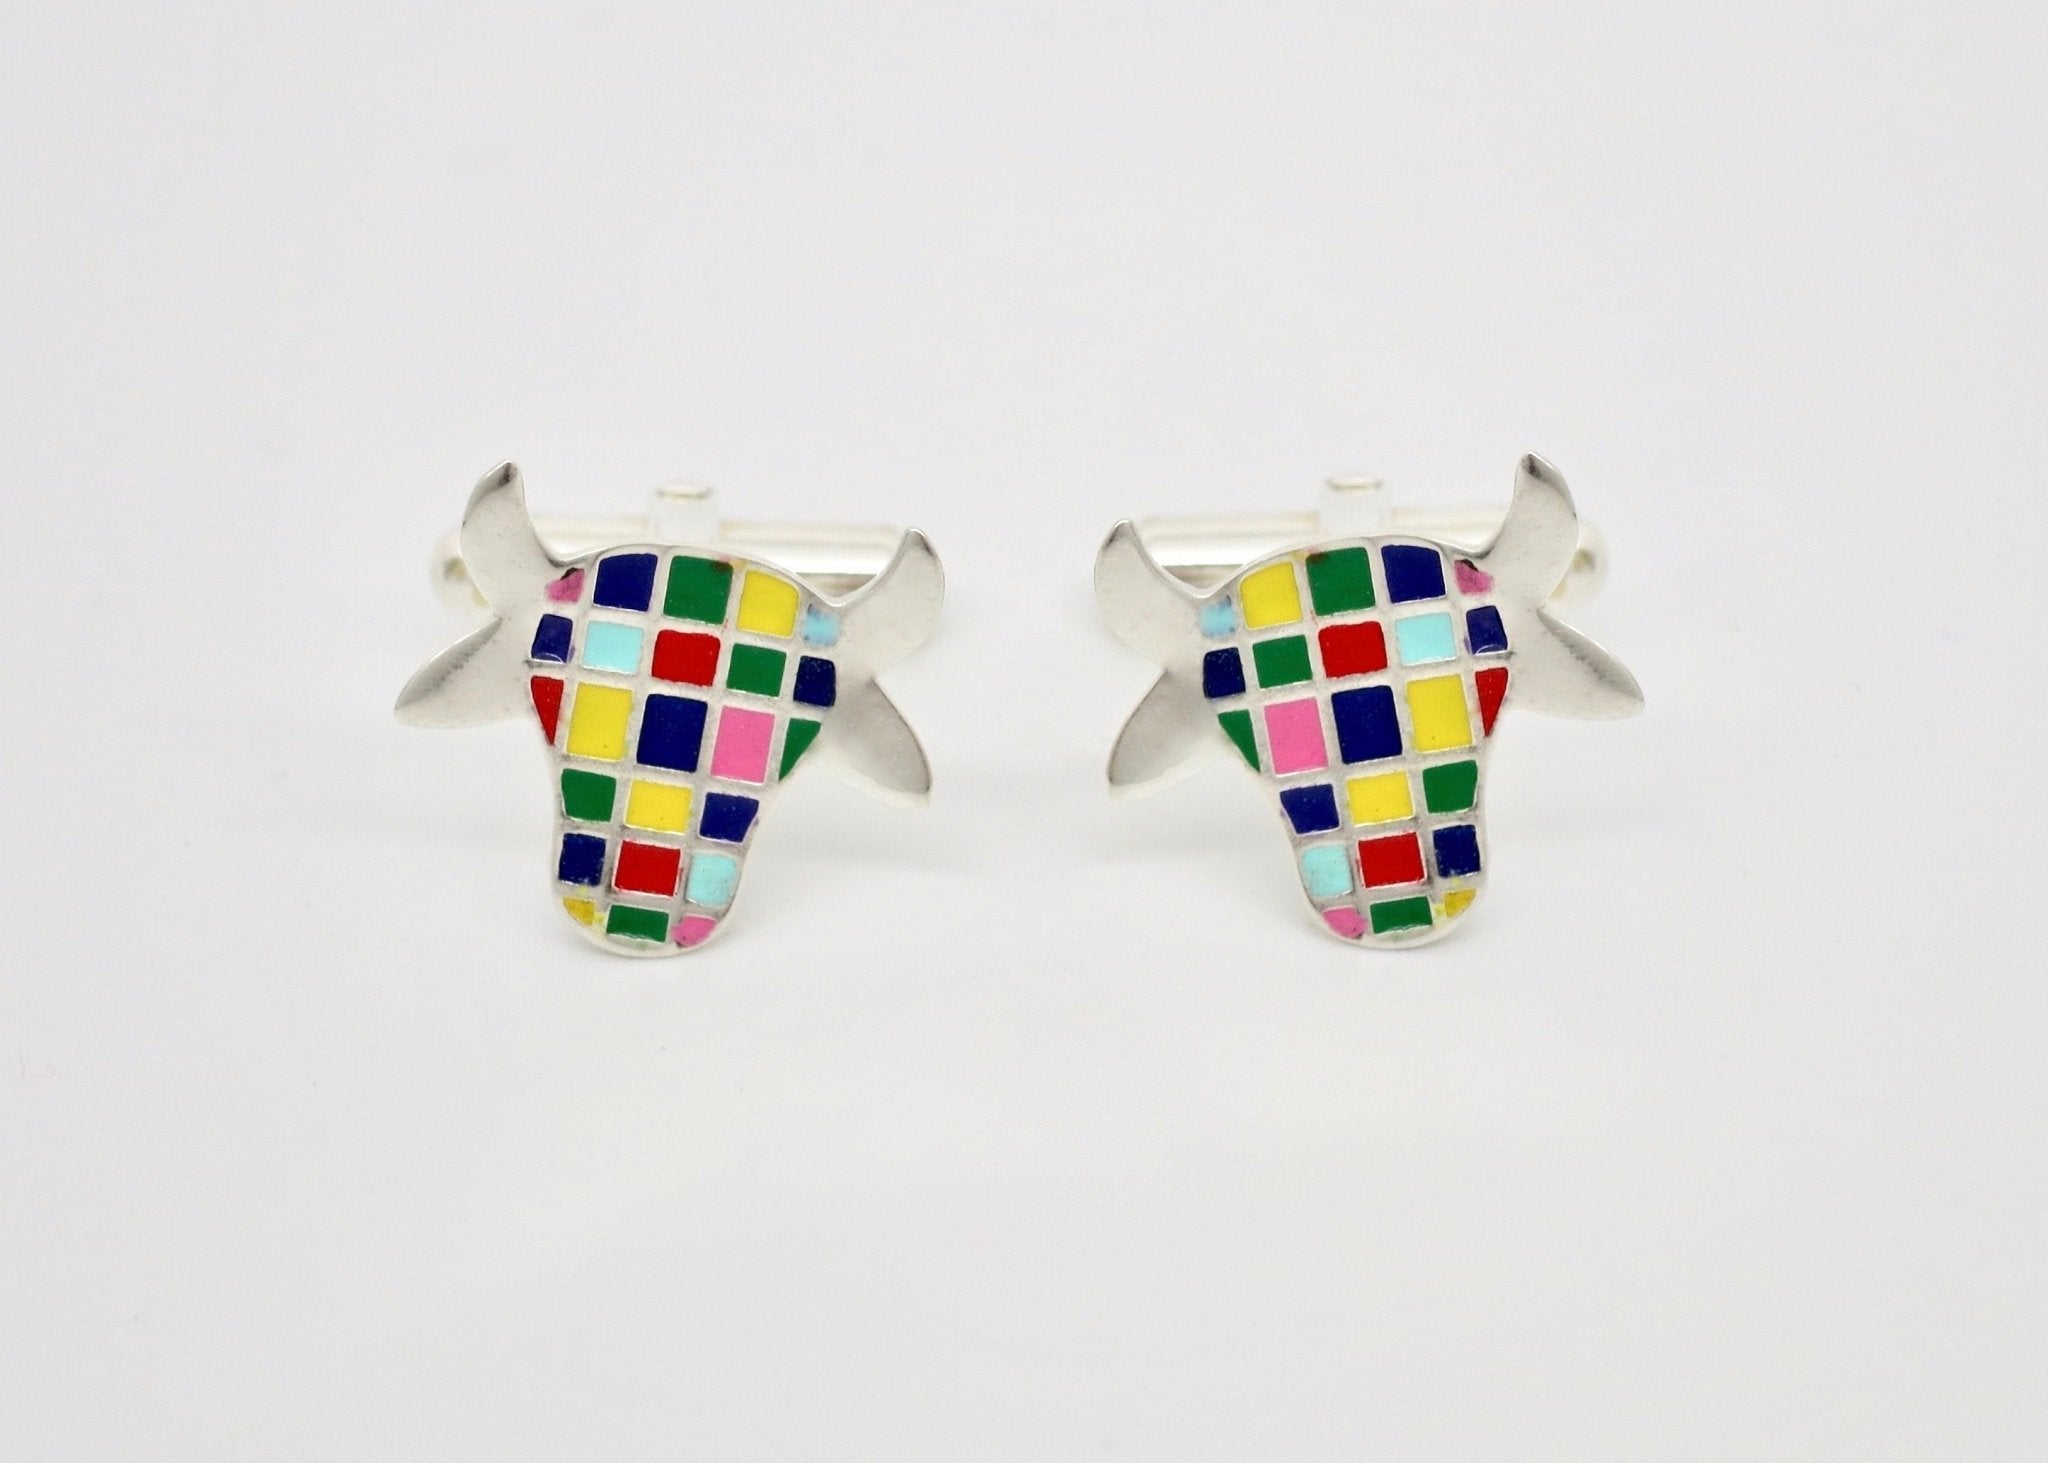 Whimsical and uber cool 'dhenu' (cow) cufflinks - Lai